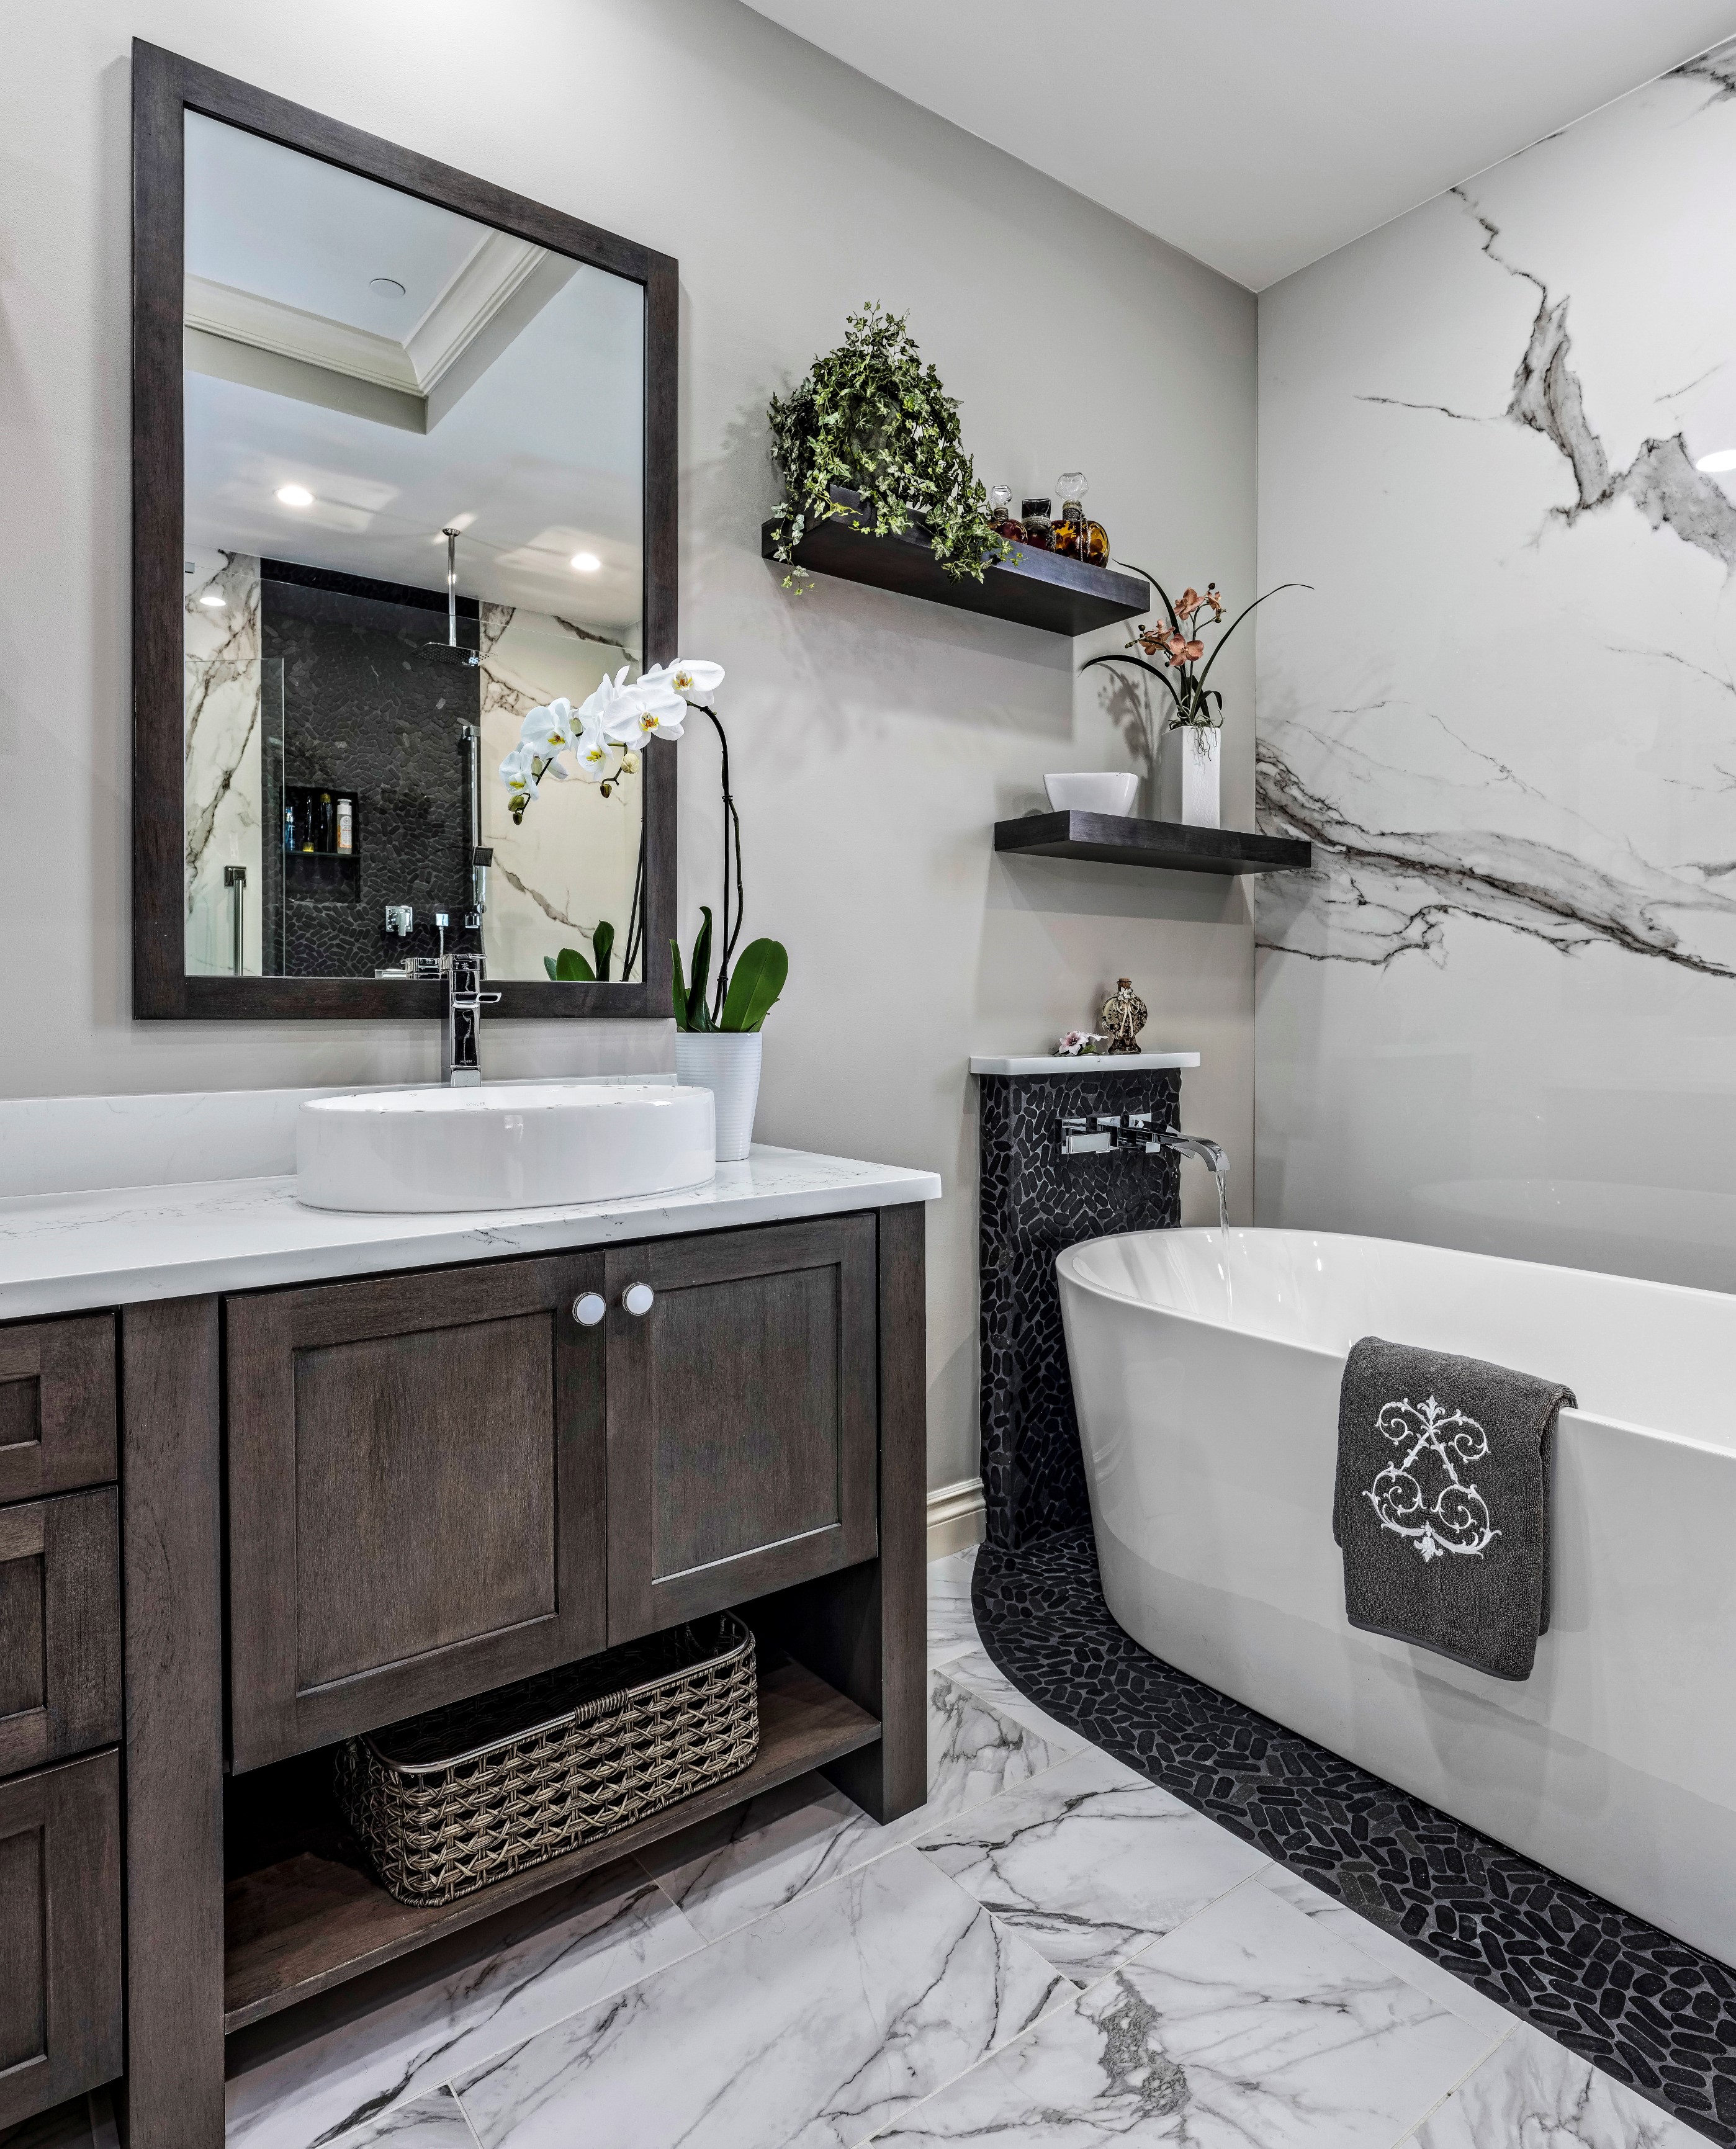 Bathroom Remodeling Typically Cost, How Much Does It Cost For A Full Bathroom Remodel